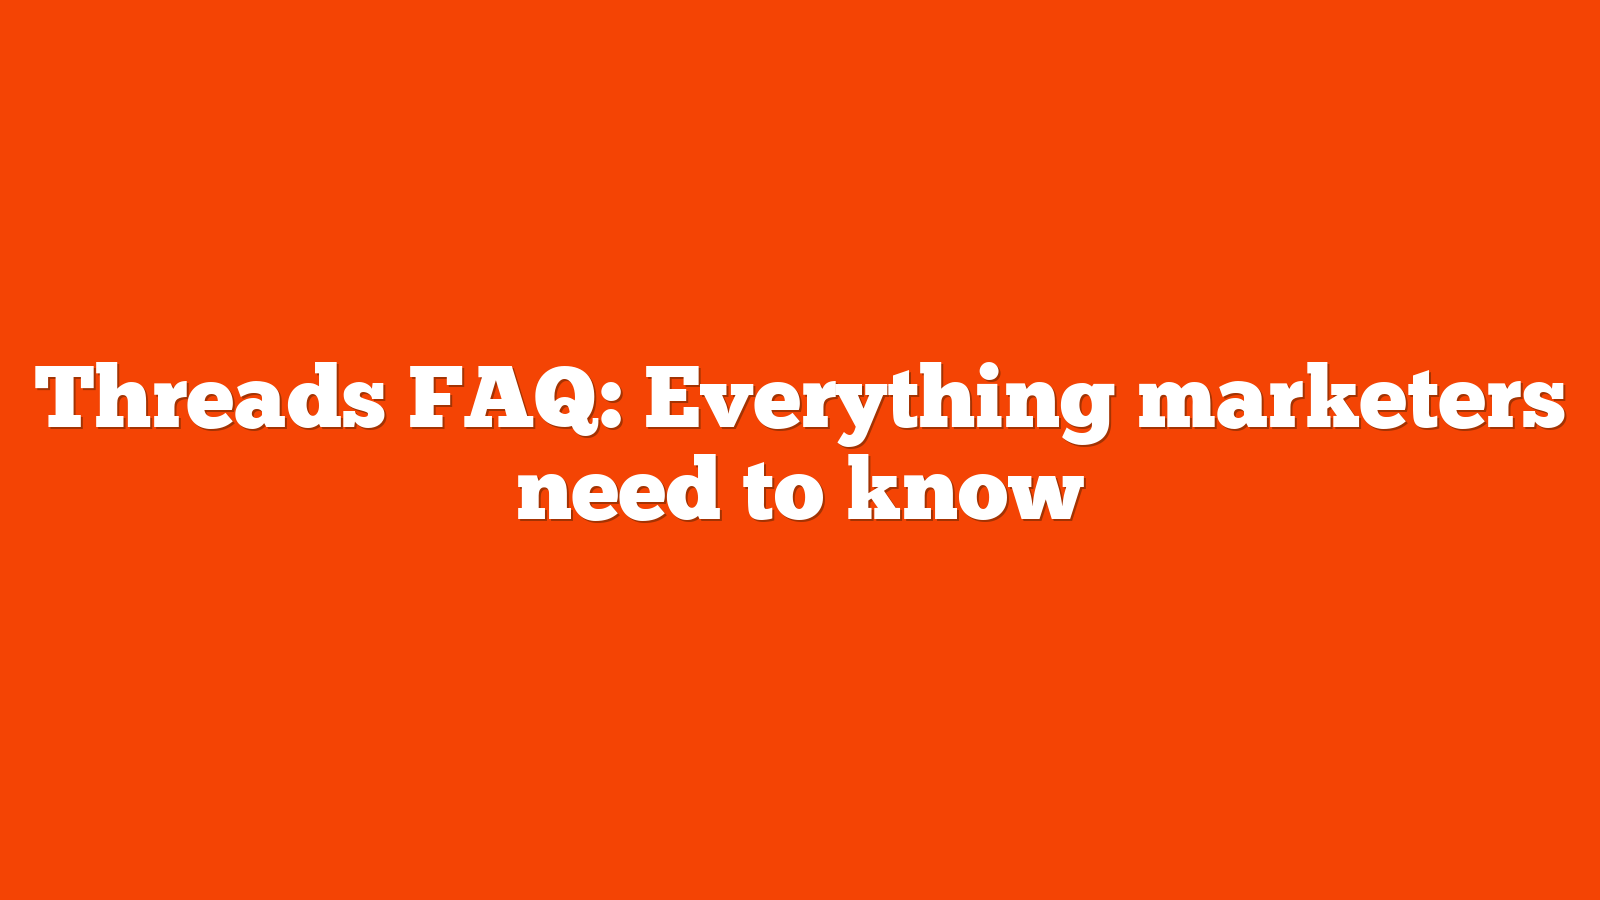 Threads FAQ: Everything marketers need to know